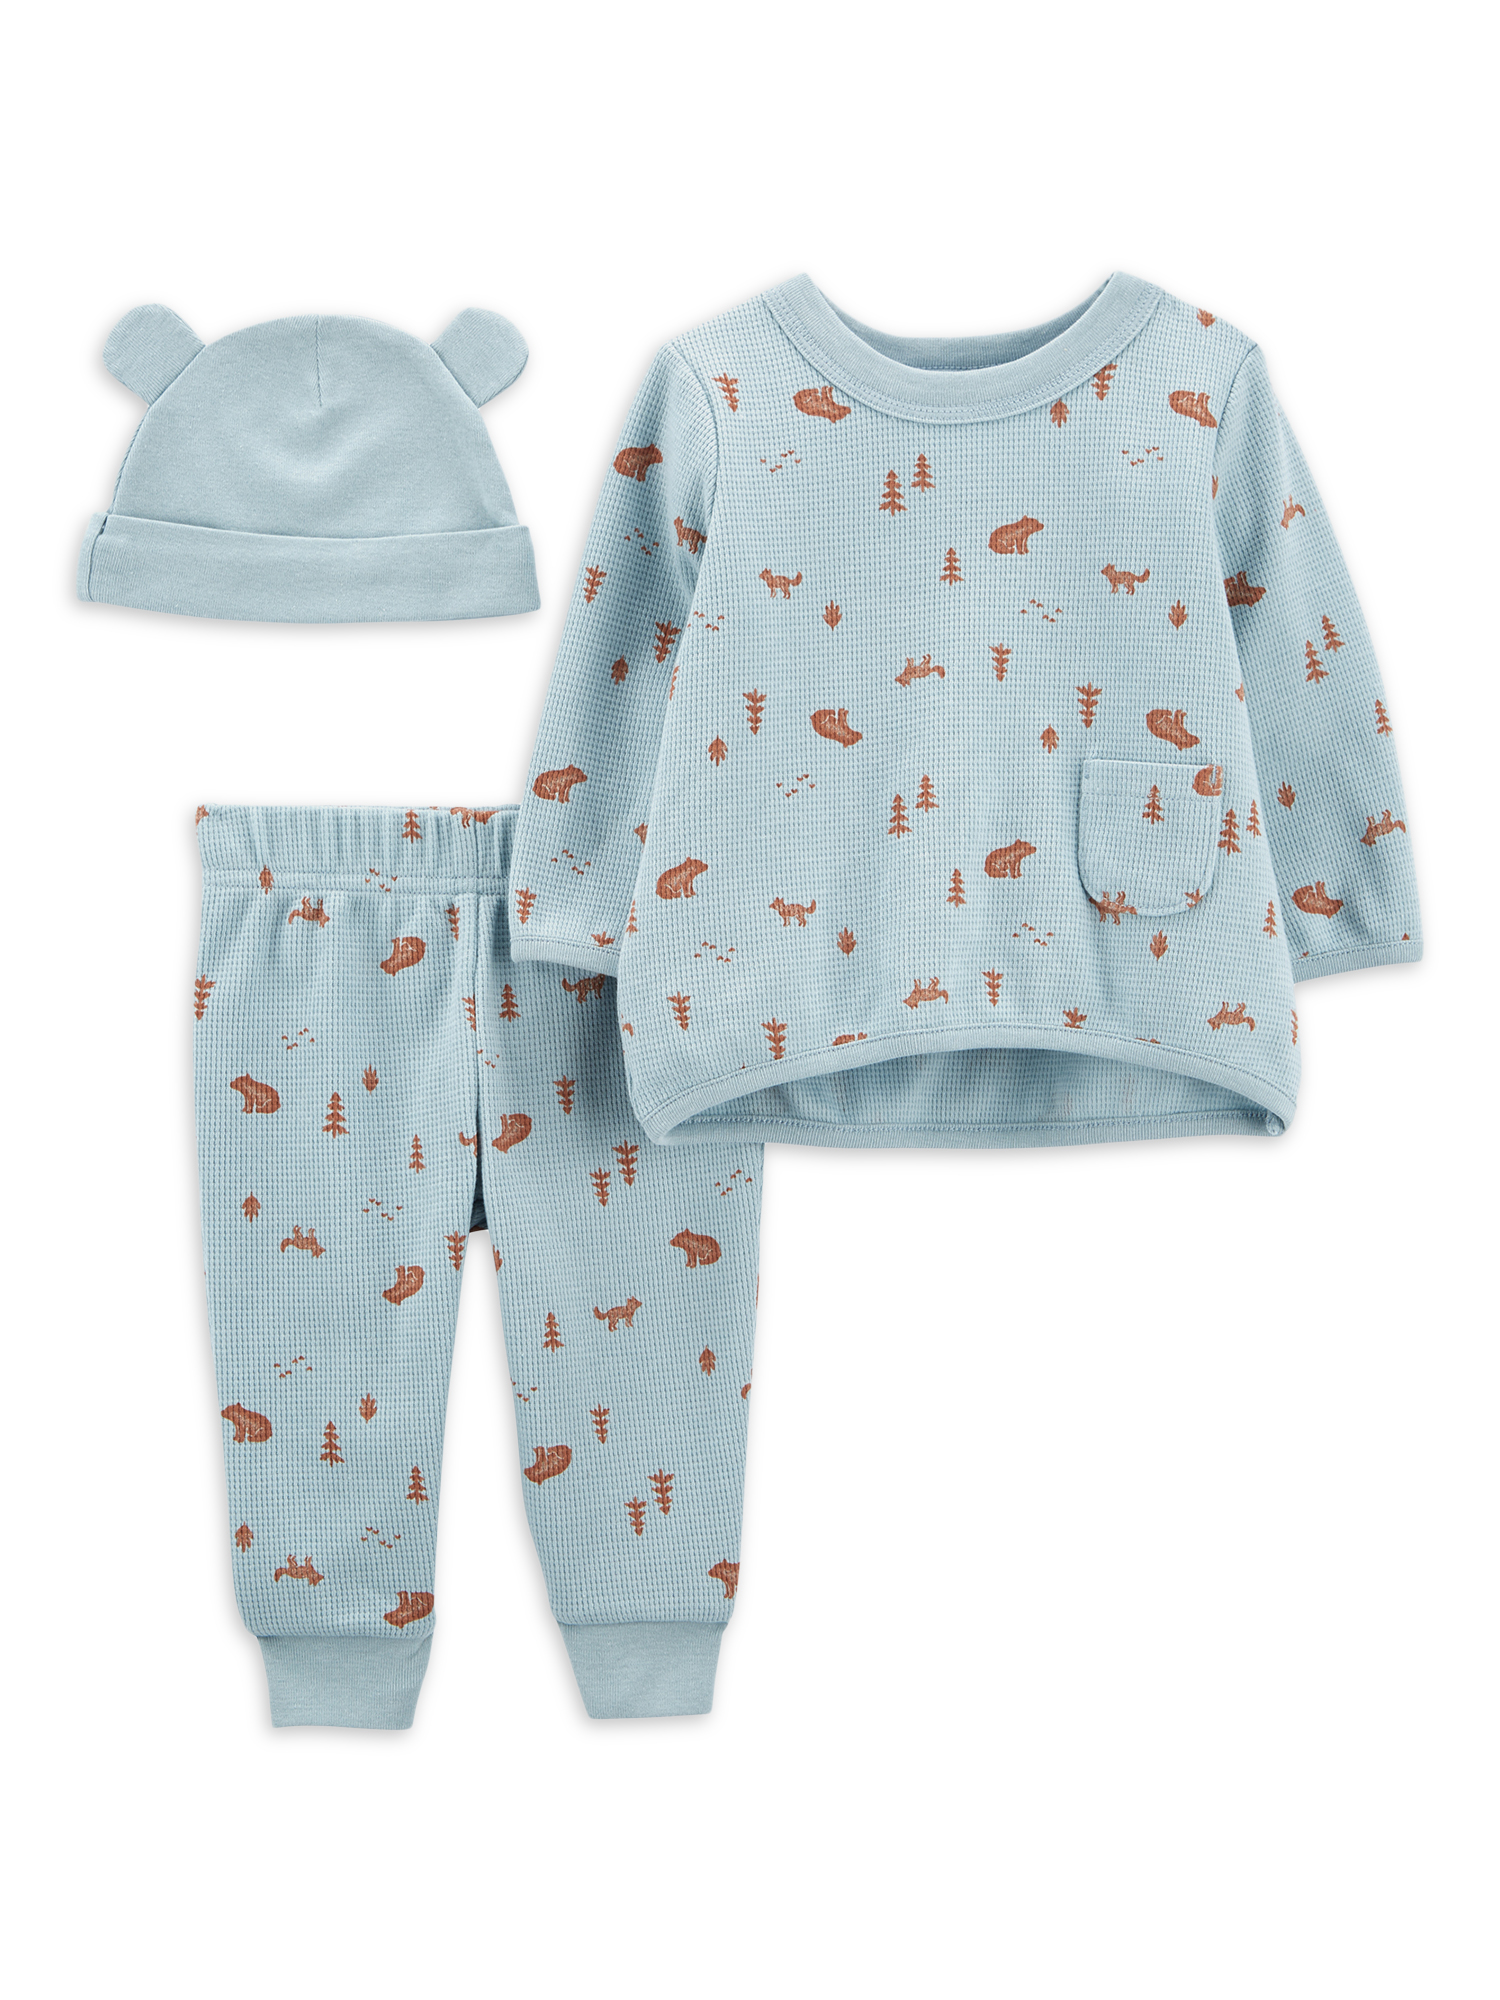 Carter's Child of Mine Baby Boy Bodysuits, Pants, Coveralls, Take Me ...